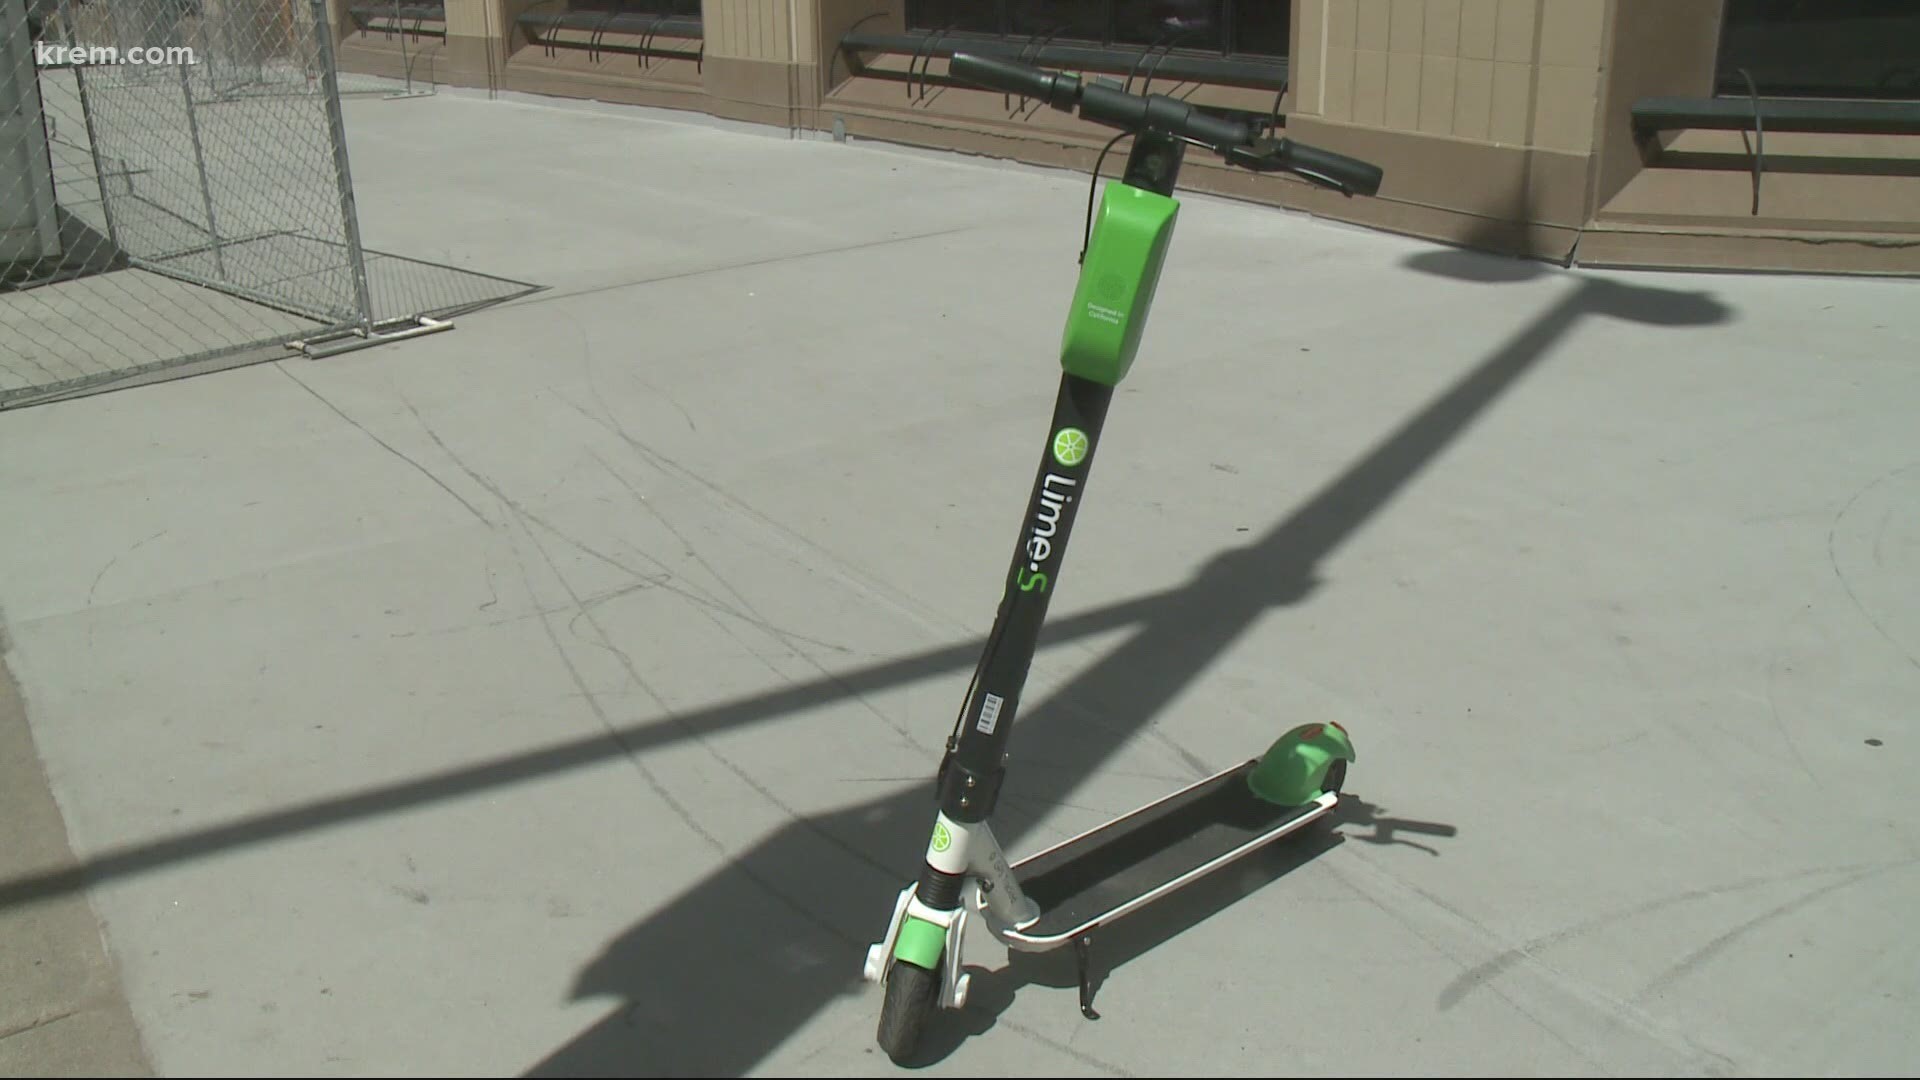 Spokane residents rode Lime scooters and bikes 50% less in 2020 compared to the previous year. But the business still has plans to expand in 2021.